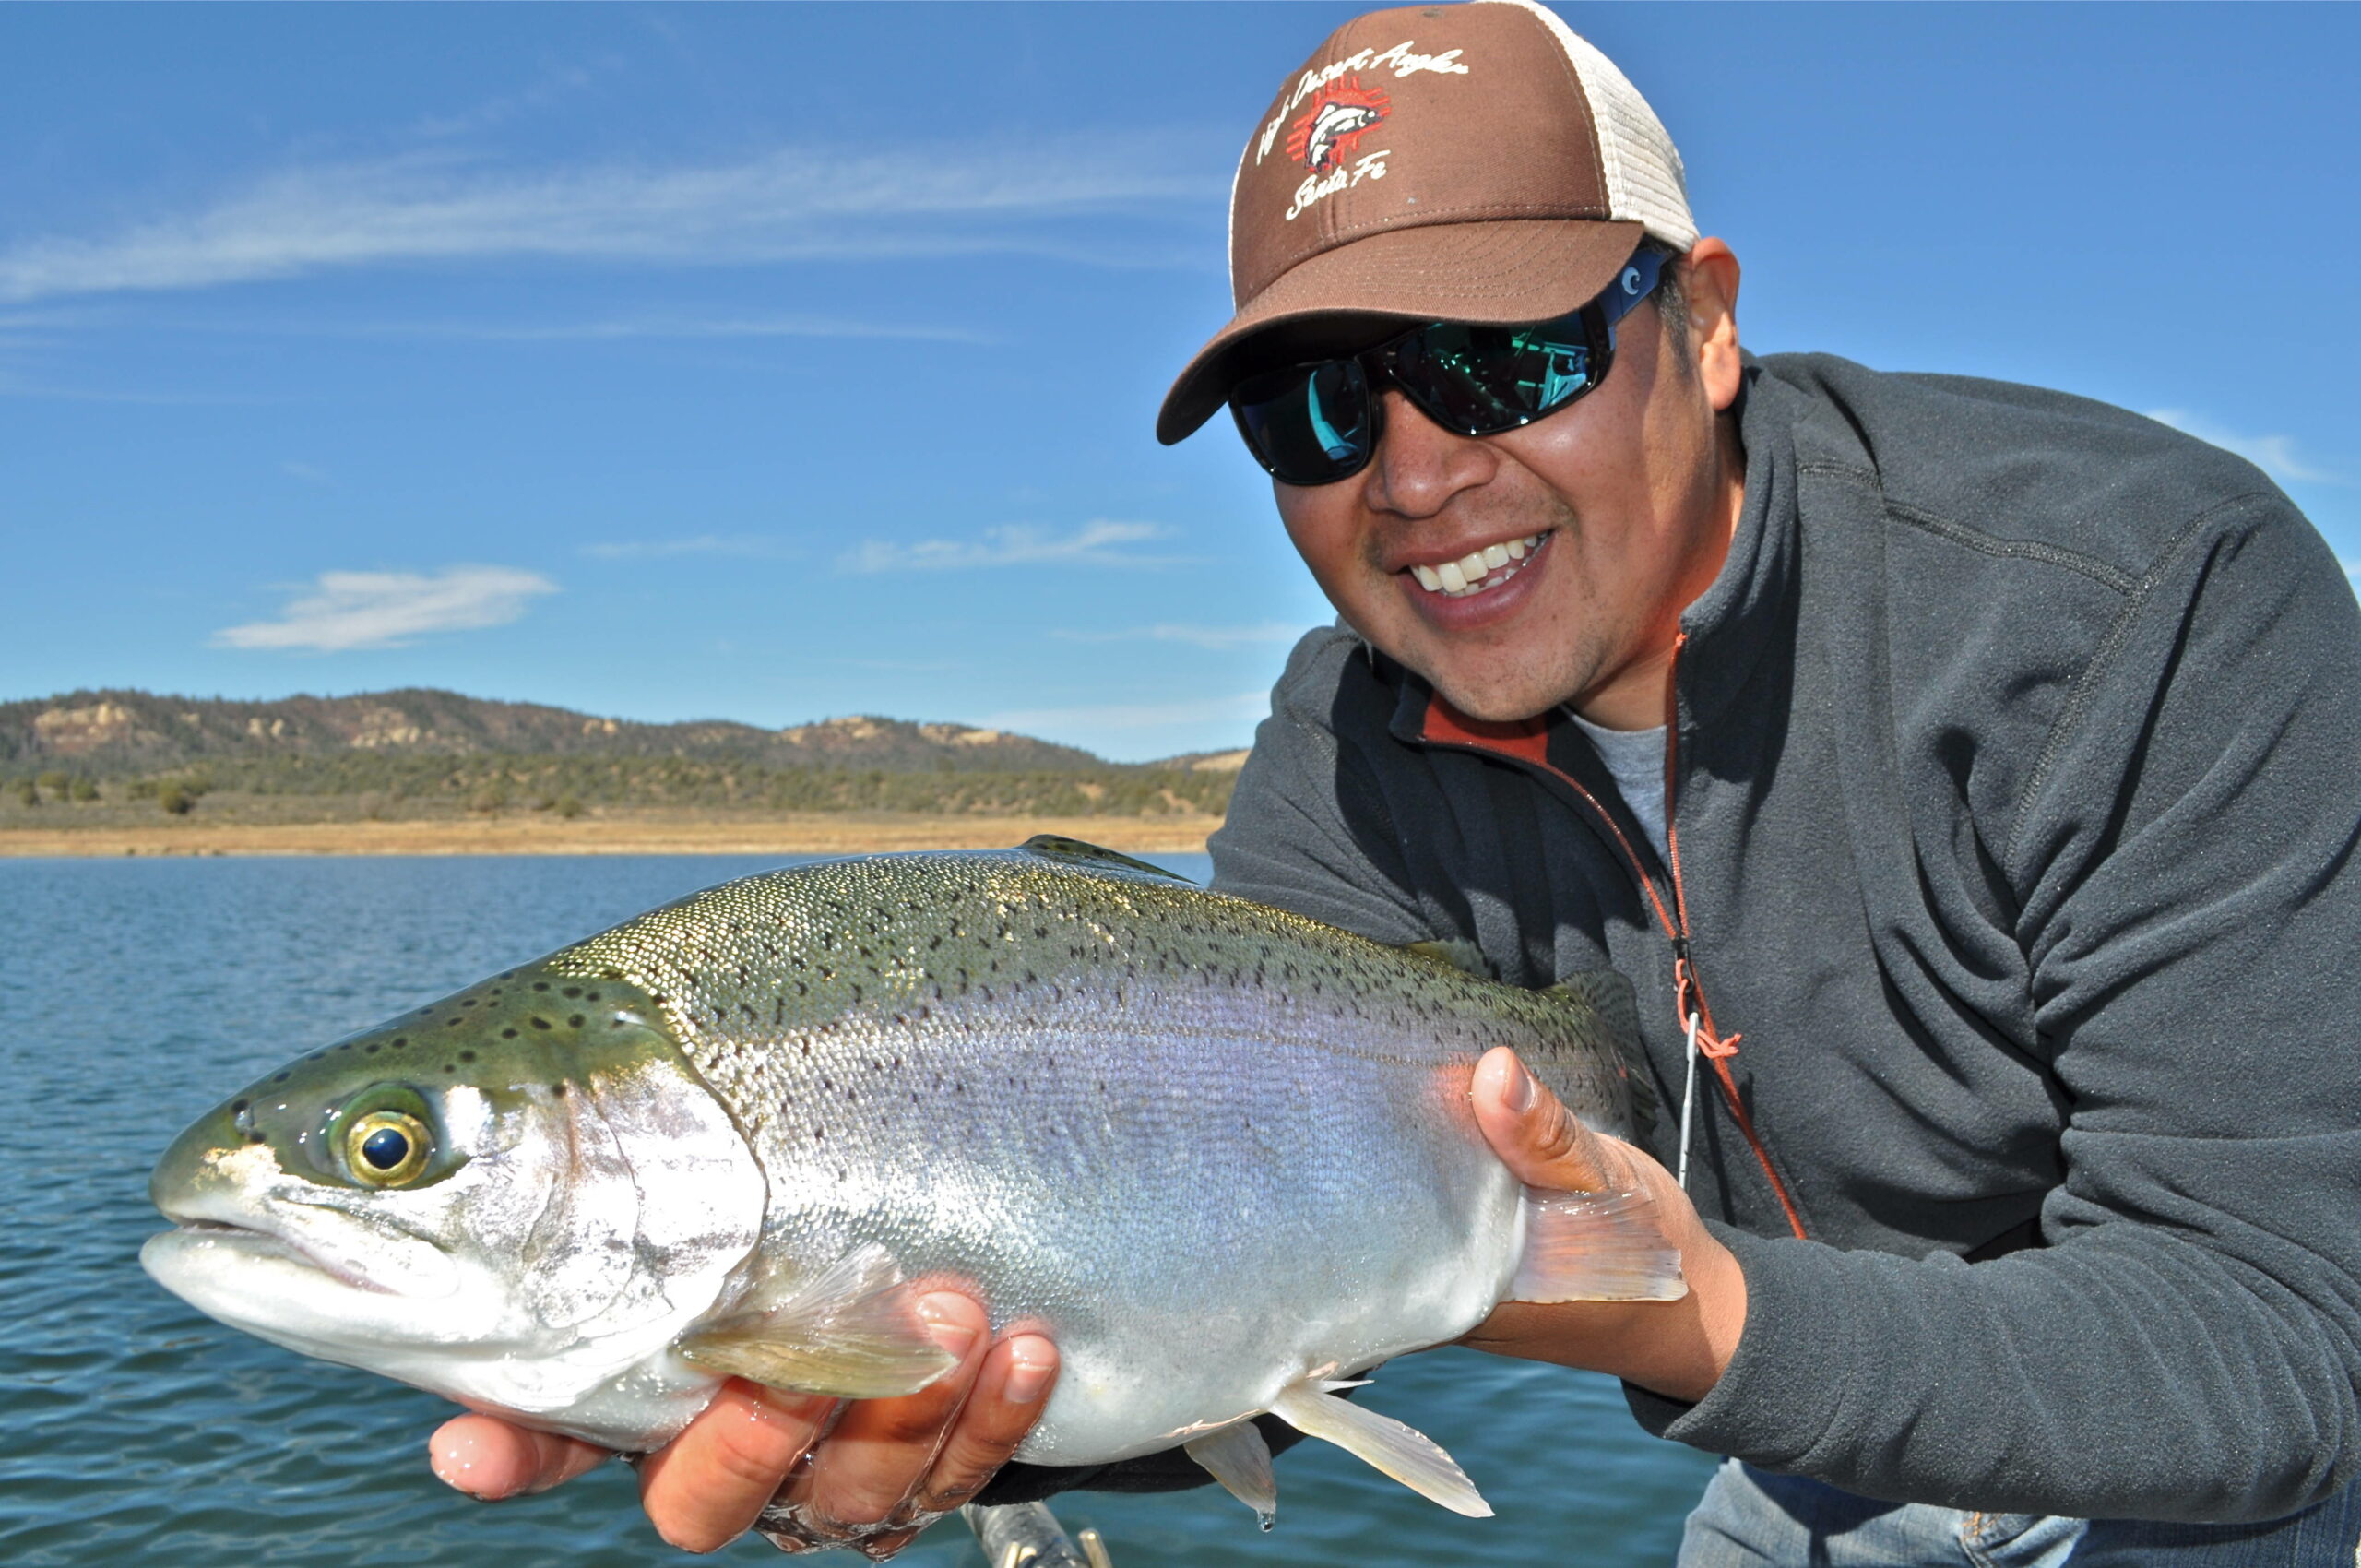 World Fly Fishing Champs In Spain - The Fishing Website